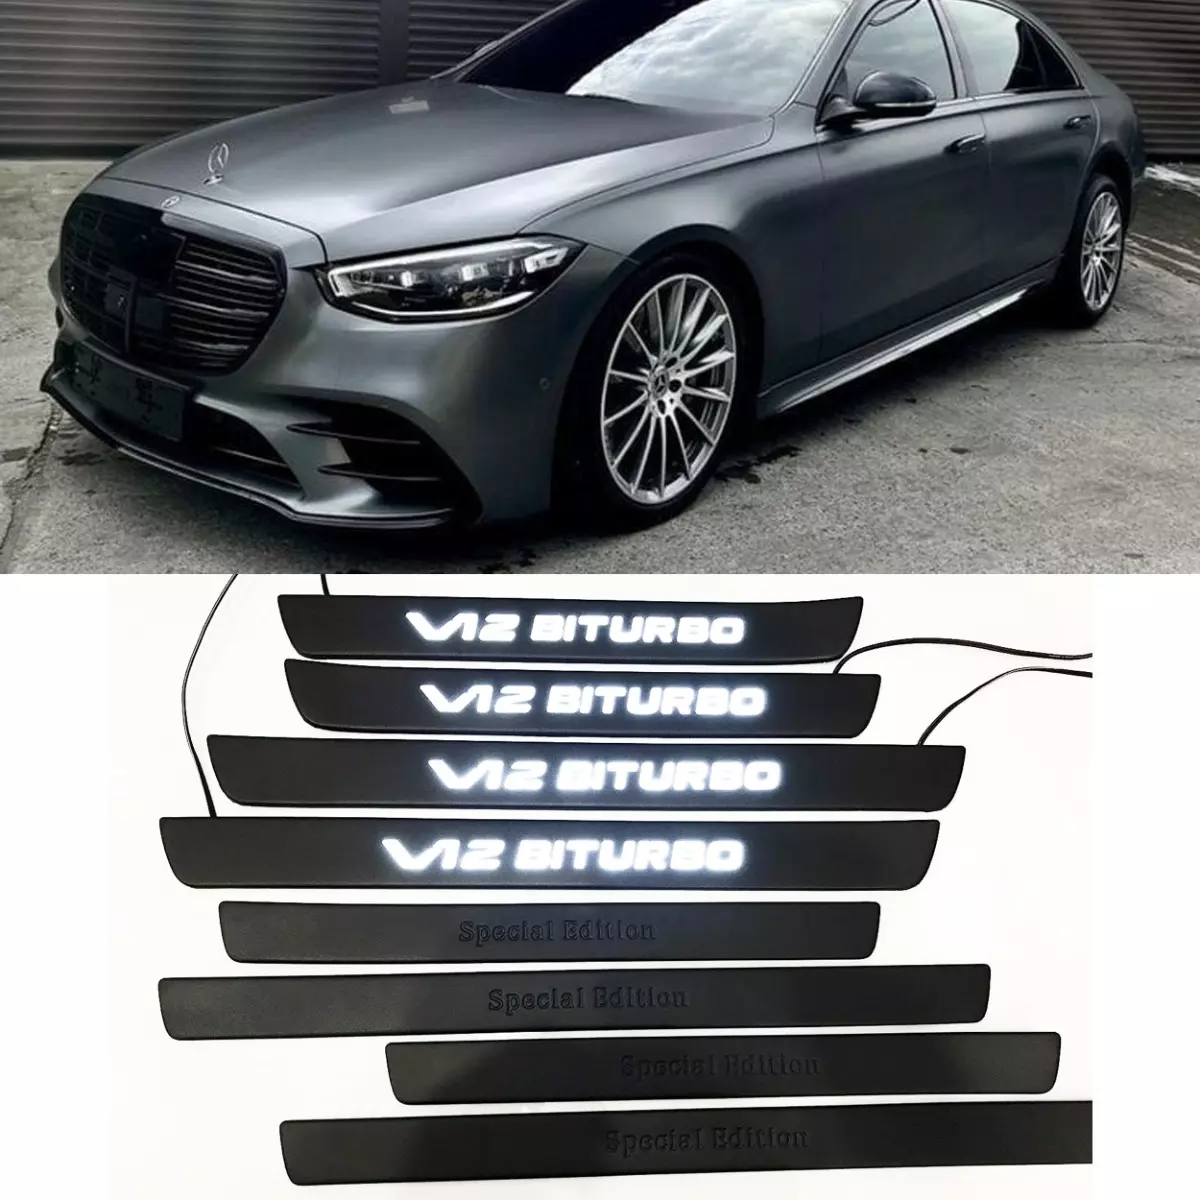 S65 V12 Biturbo Special Edition style LED Door Sills for Mercedes W222